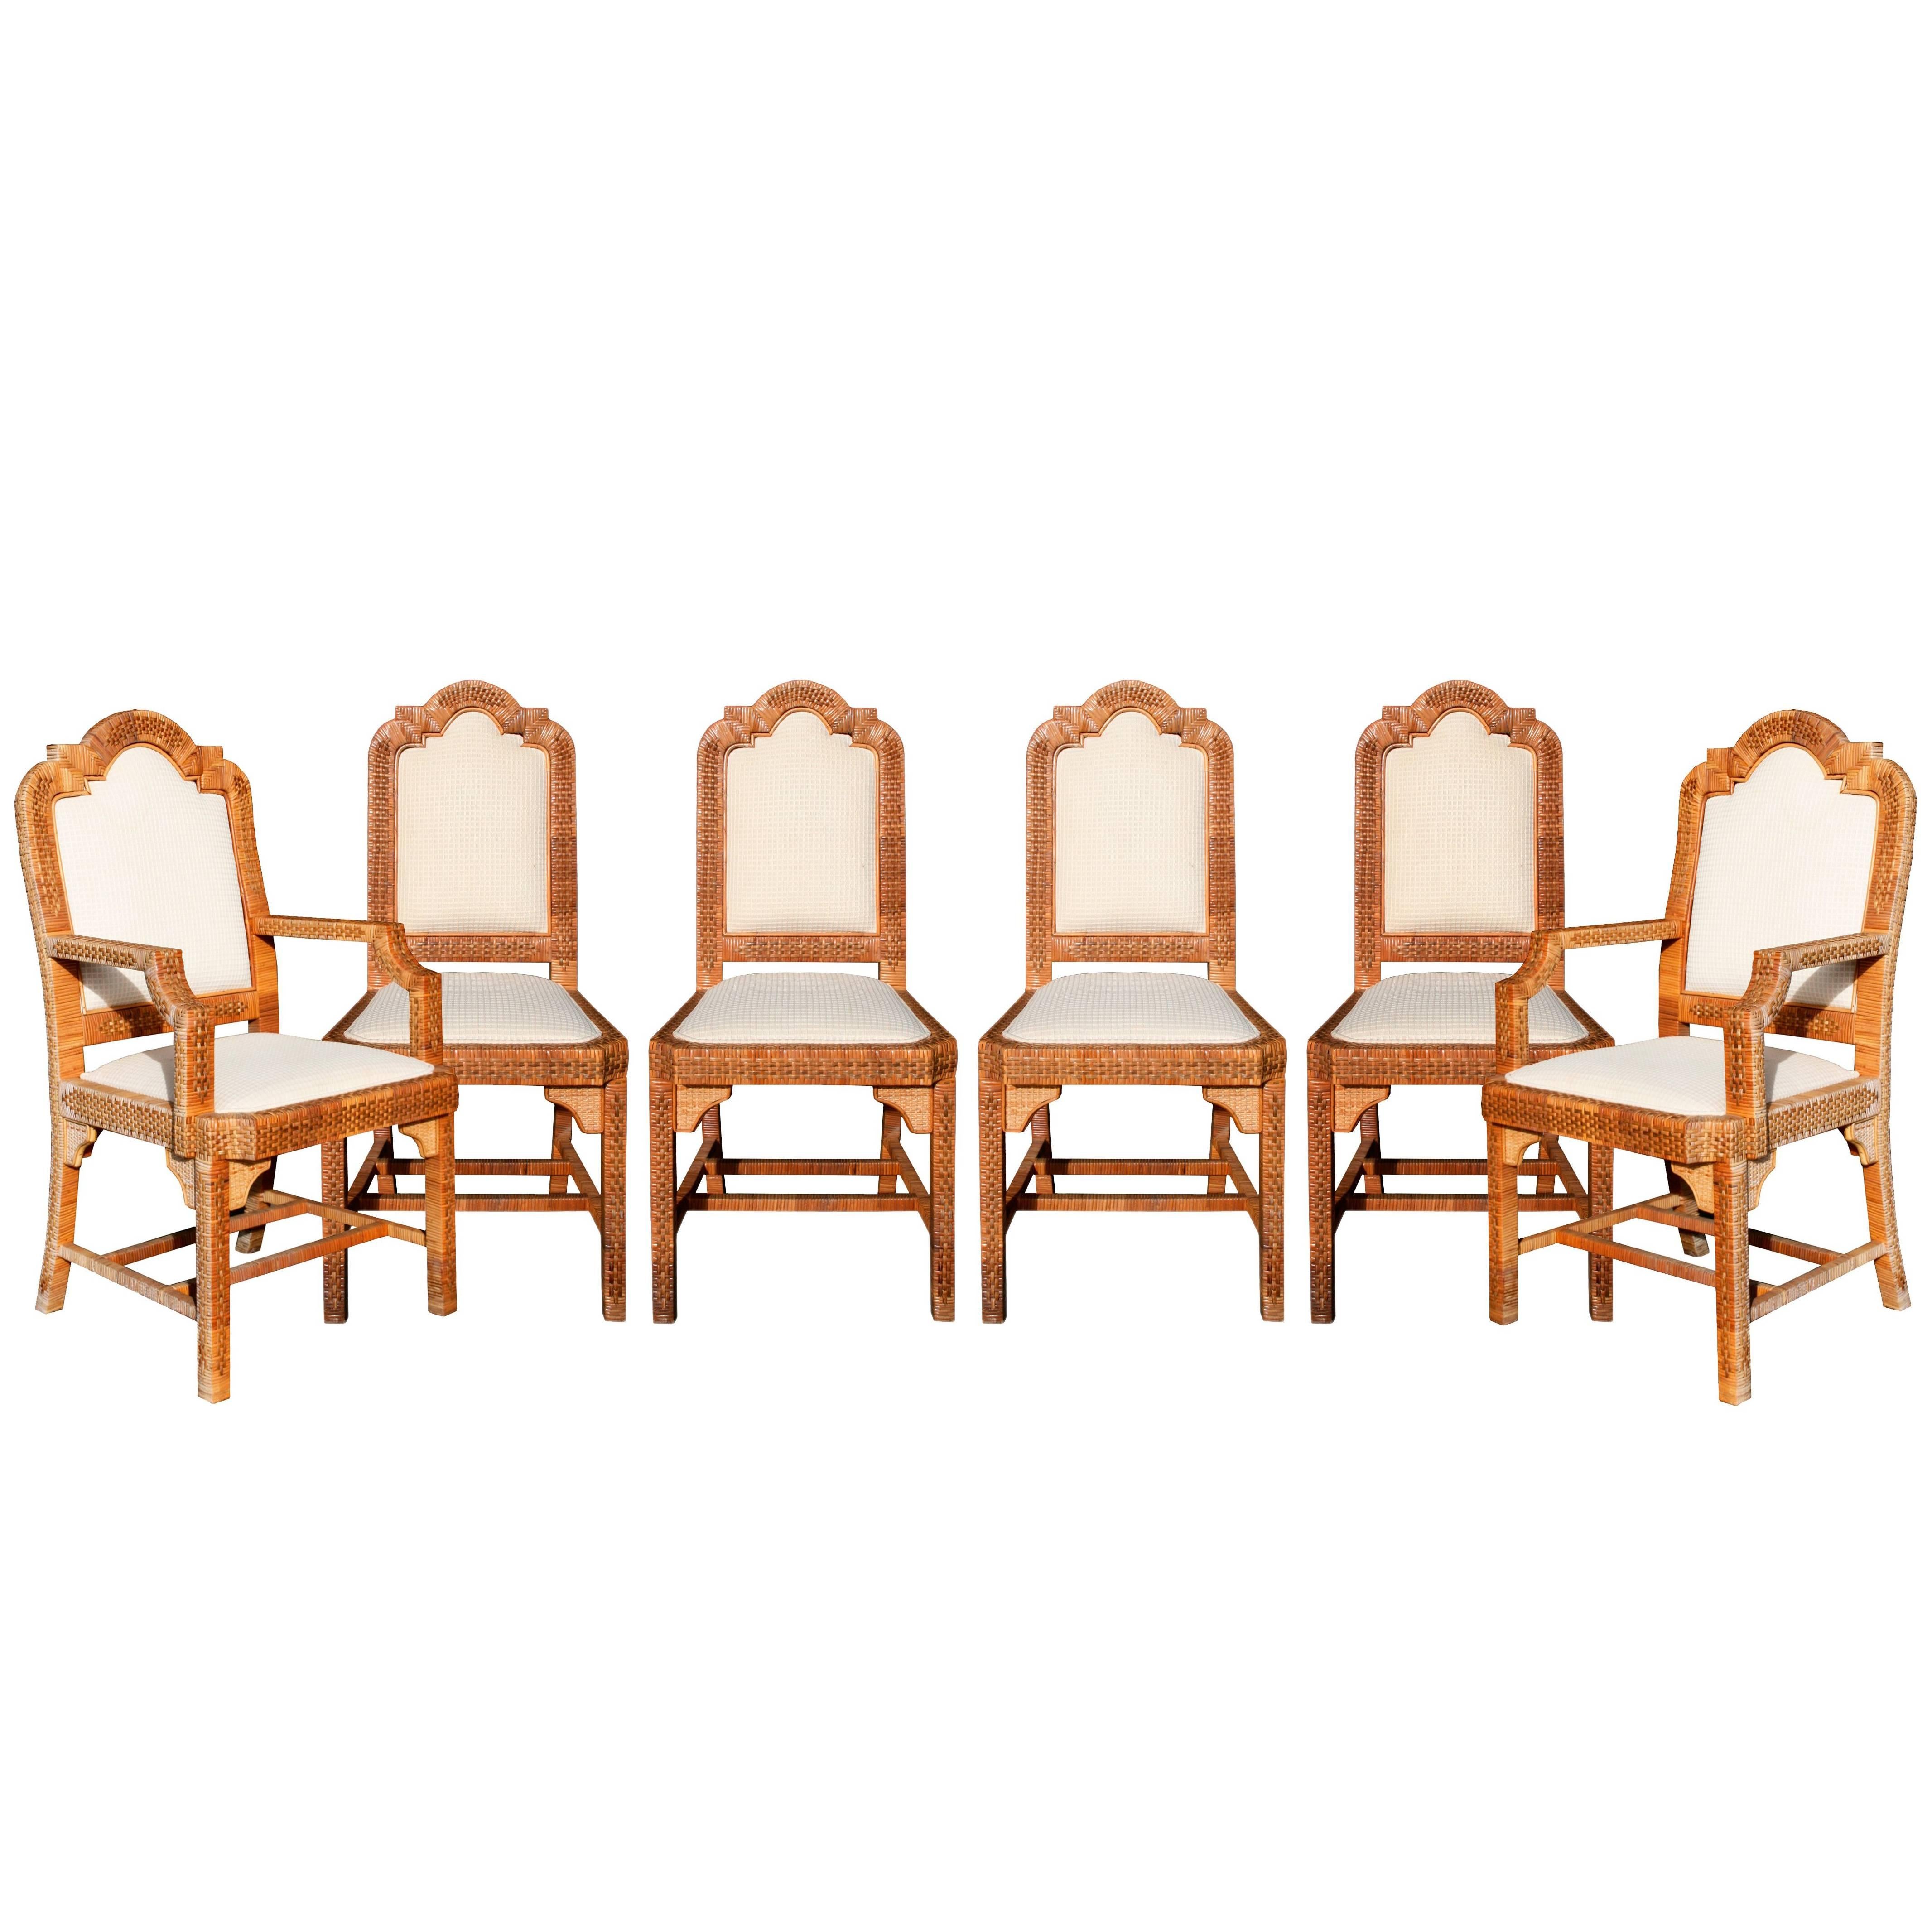 1980s Six-Piece Seating Set, Solid Wood Frames Lined with Interlaced Wicker